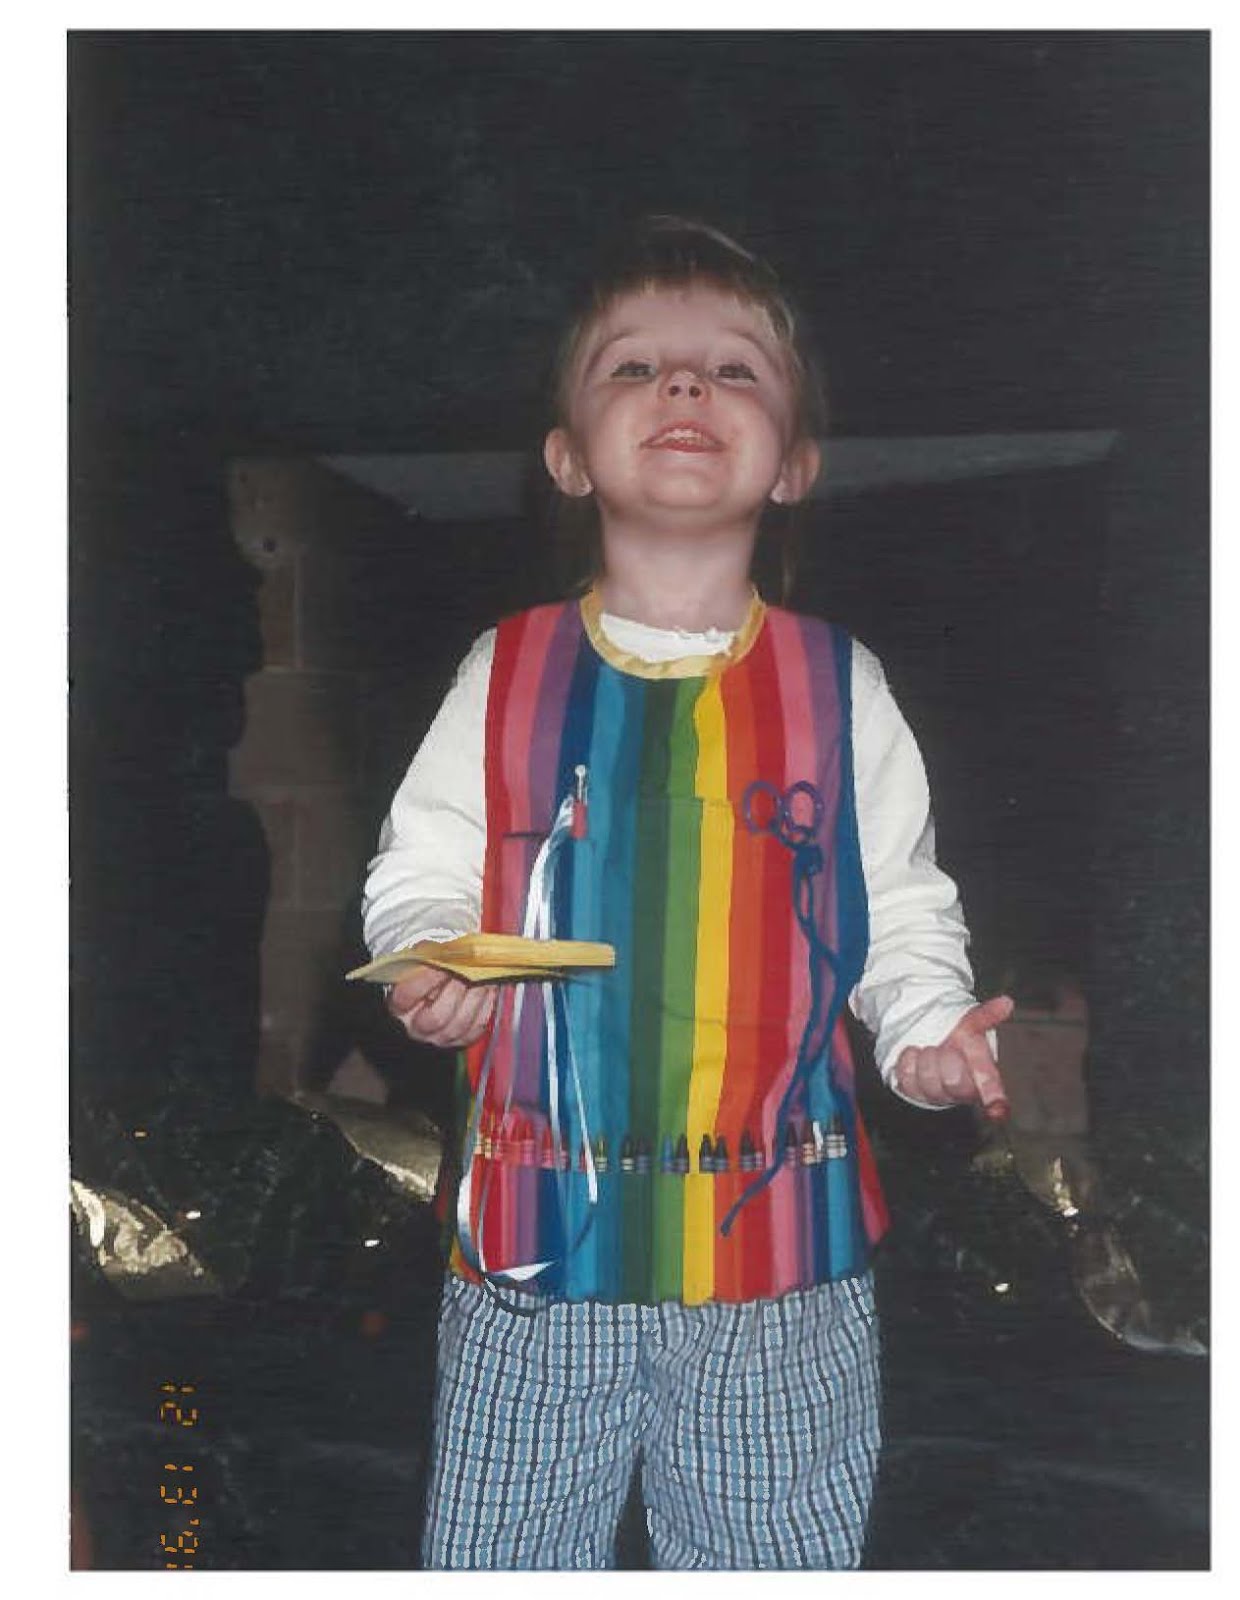 Age 3 with my "craft vest"